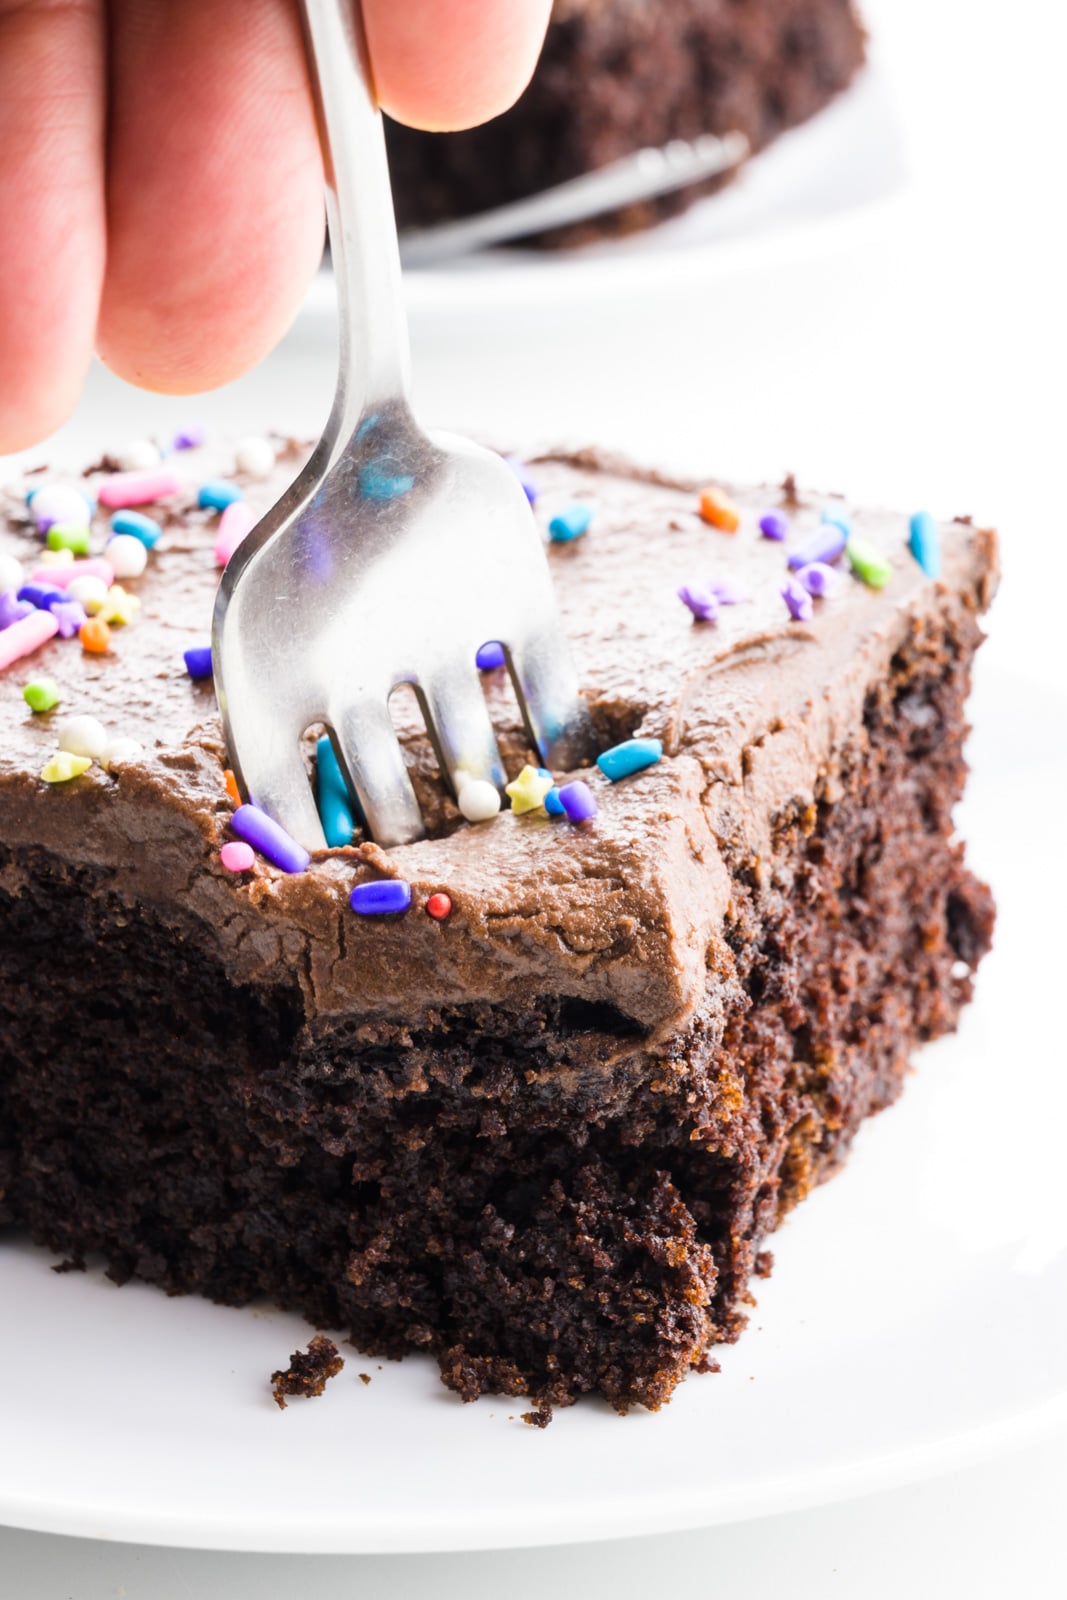 A hand holds a fork digging into a slice of chocolate cake.